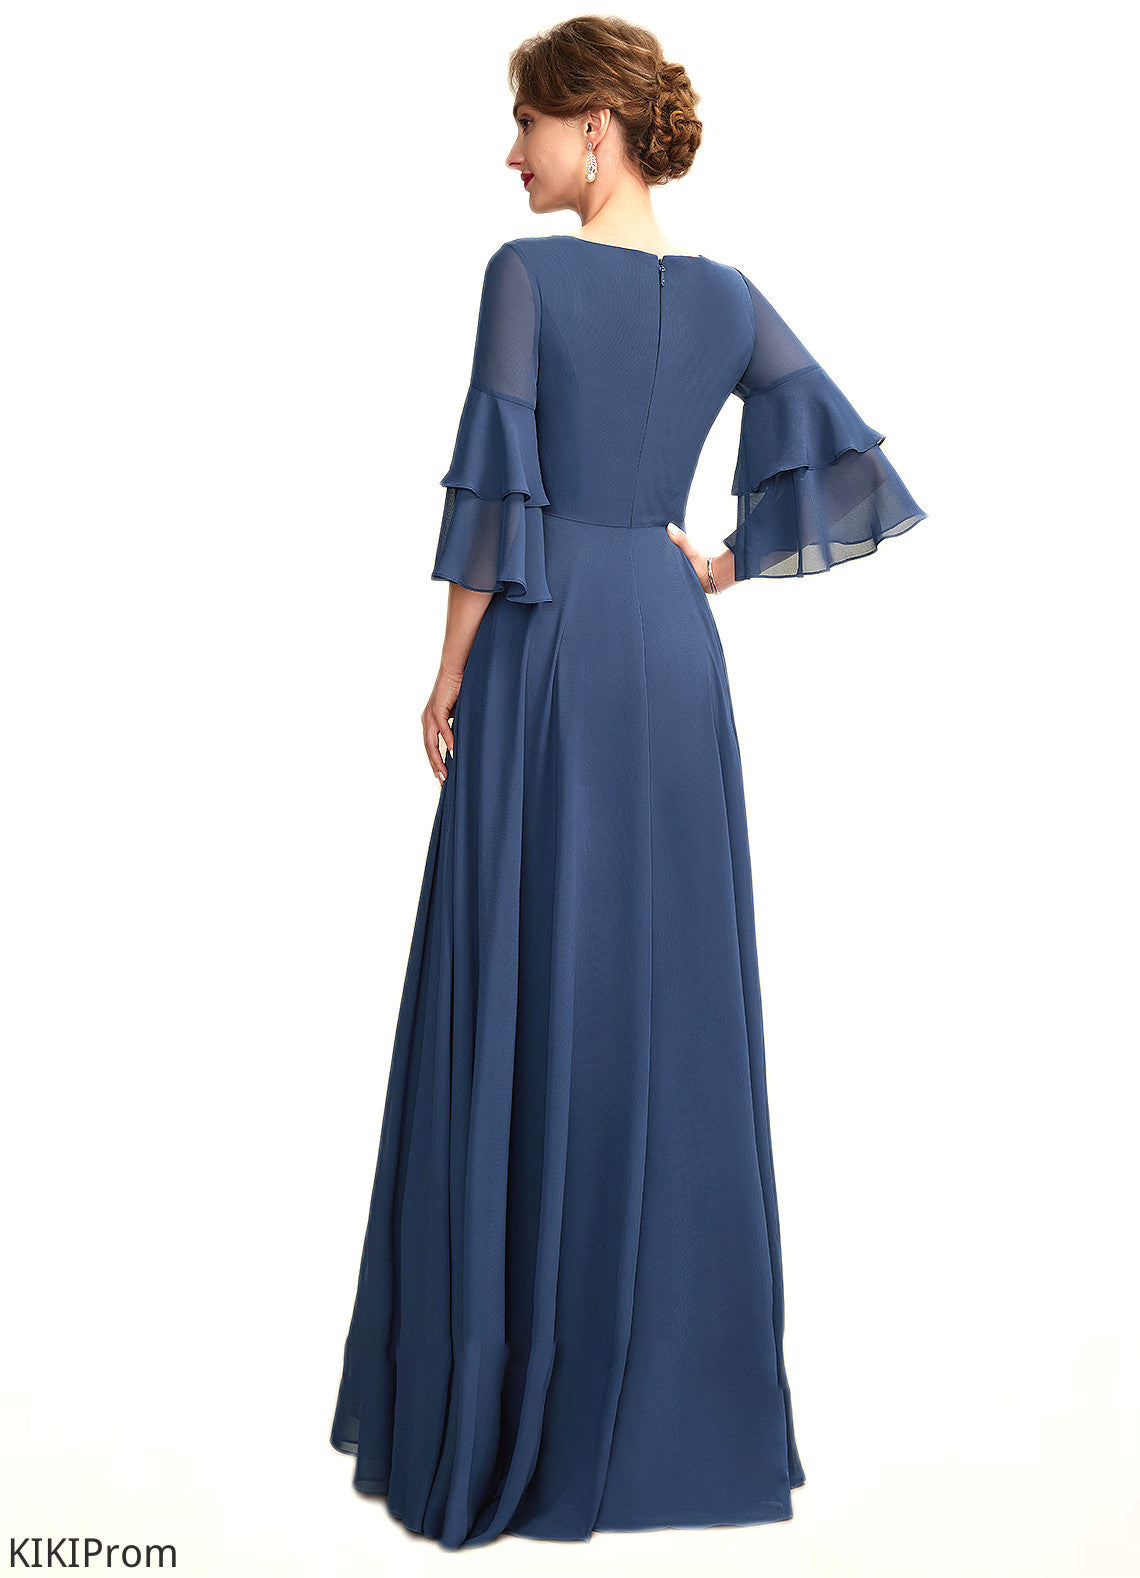 Hadley A-Line V-neck Floor-Length Chiffon Mother of the Bride Dress With Cascading Ruffles DZ126P0015003